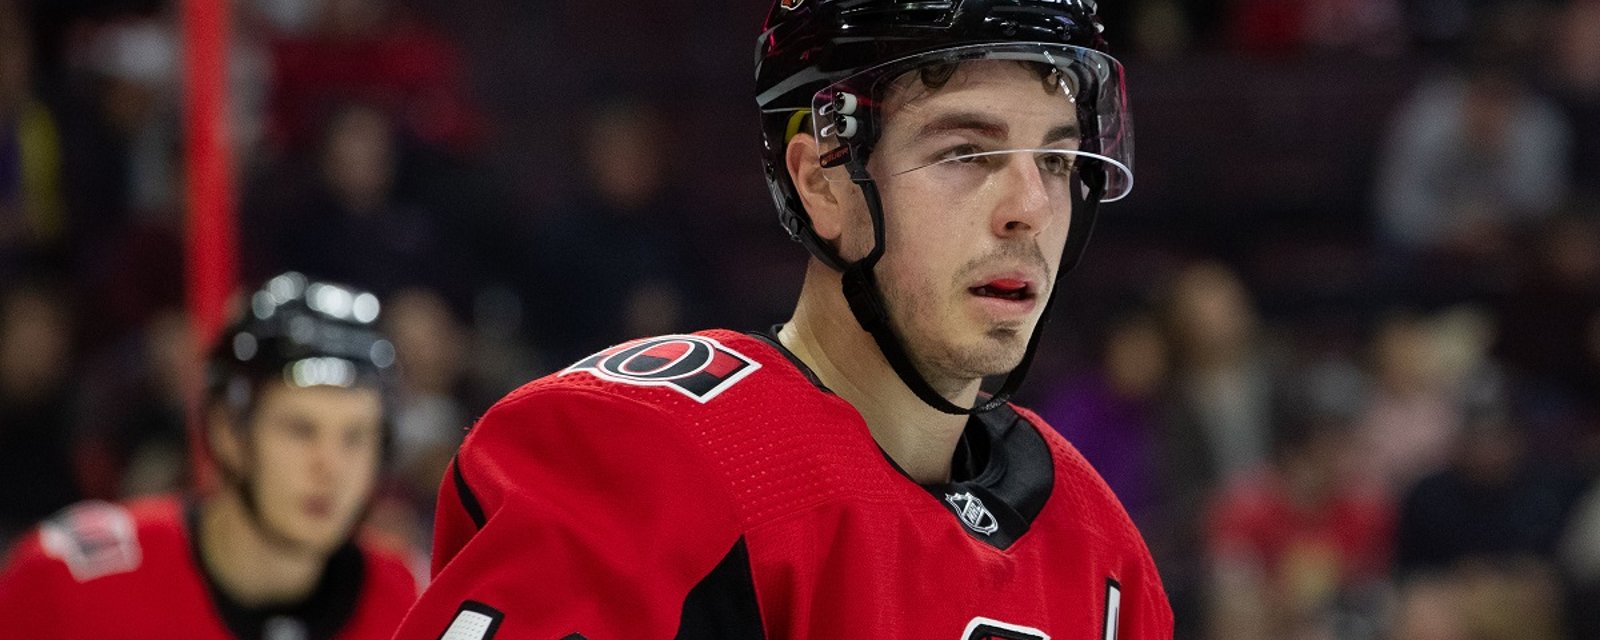 Islanders sign Jean Gabriel Pageau to a long term deal just hours after trading for him.